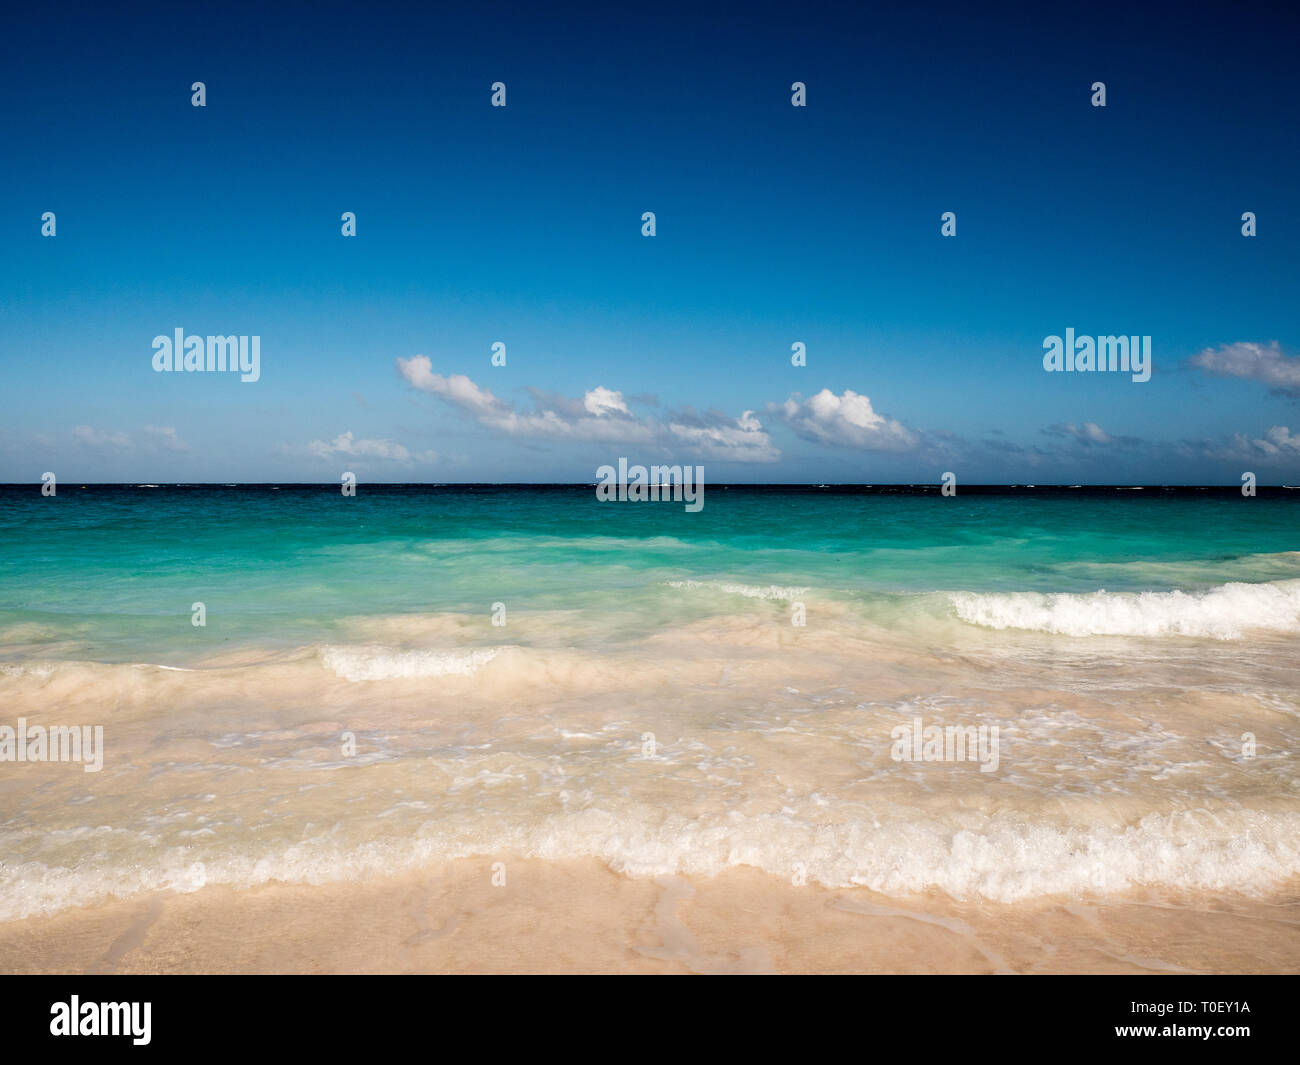 Beautiful Tropical Beach, With Clean Waves, Hitting Shore, Pink Sands Beach, Dunmore Town, Harbour Island, Eleuthera, The Bahamas, The Caribbean. Stock Photo